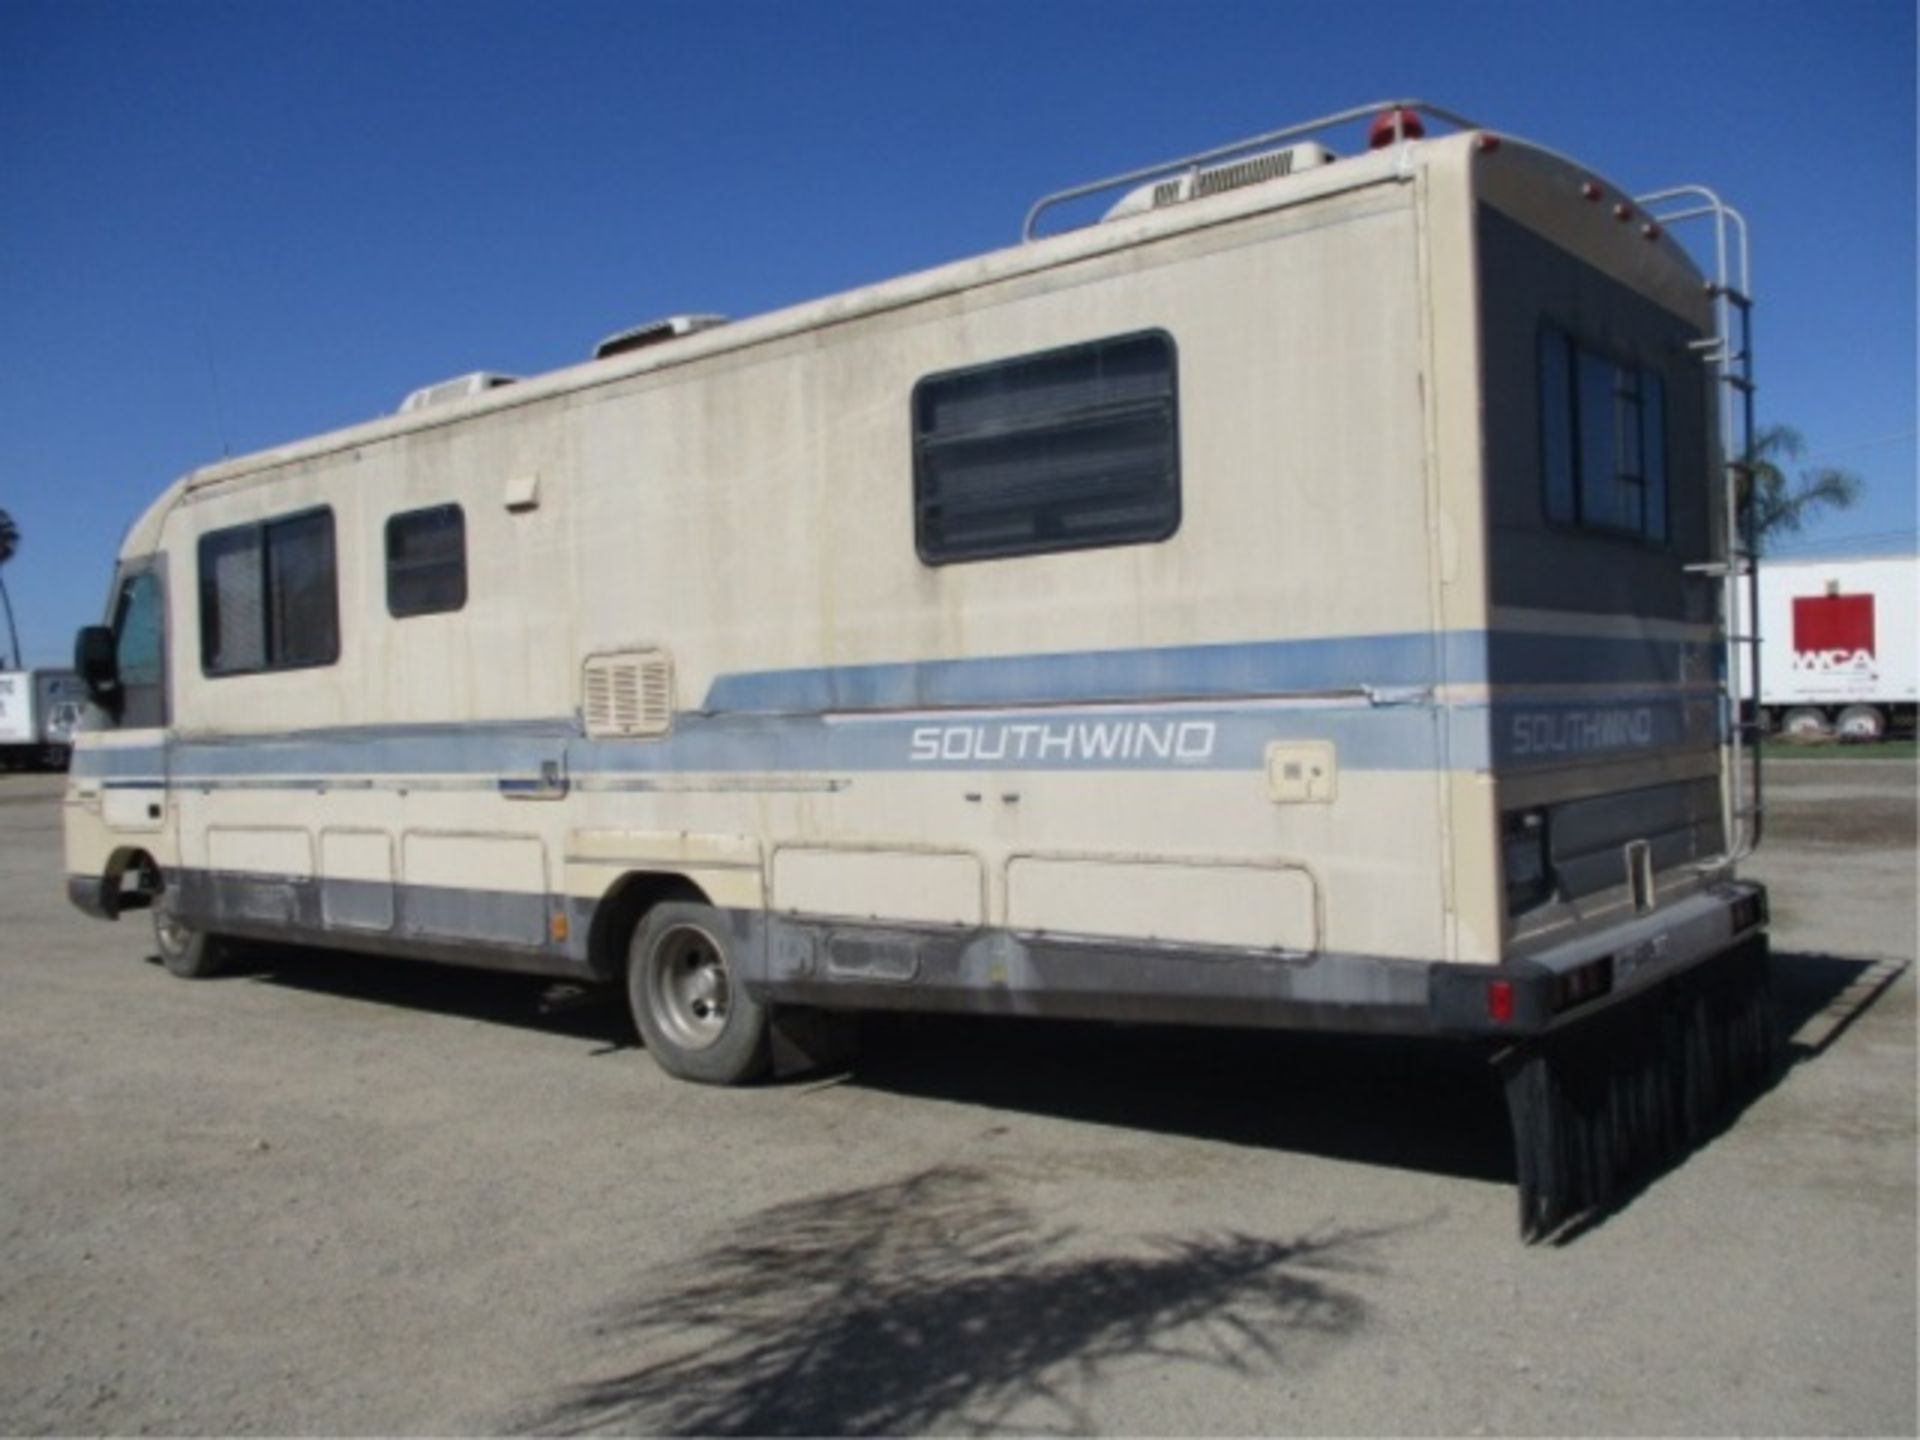 Fleetwood Southwind Motor Home, V8 Gas, Automatic, Refrigerator, Microwave, Stove, Bathroom W/ - Image 23 of 121